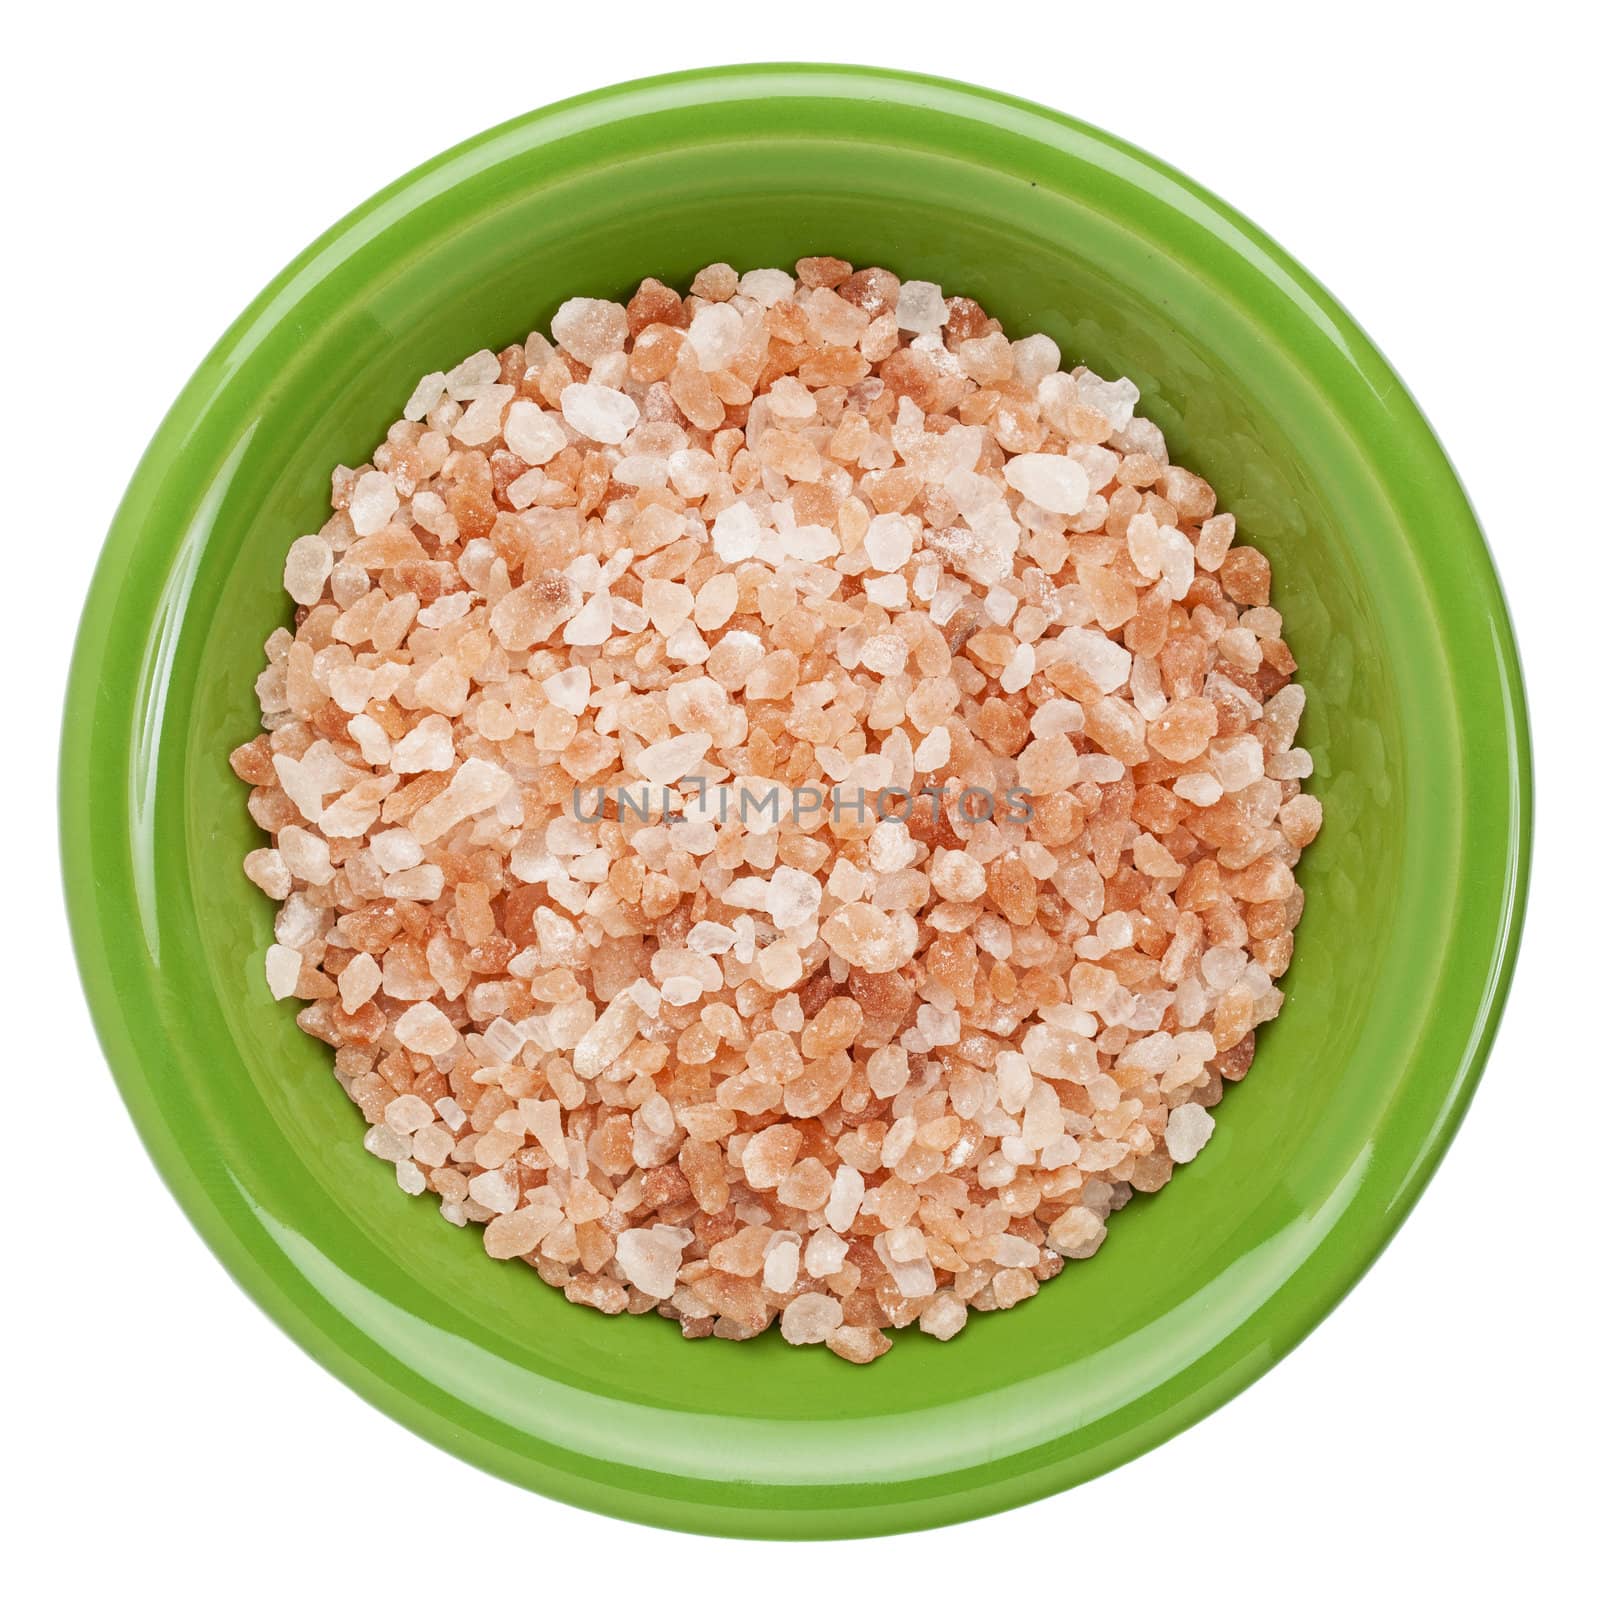 Himalayan salt coarse crystals in green ceramic bowl isolated on white